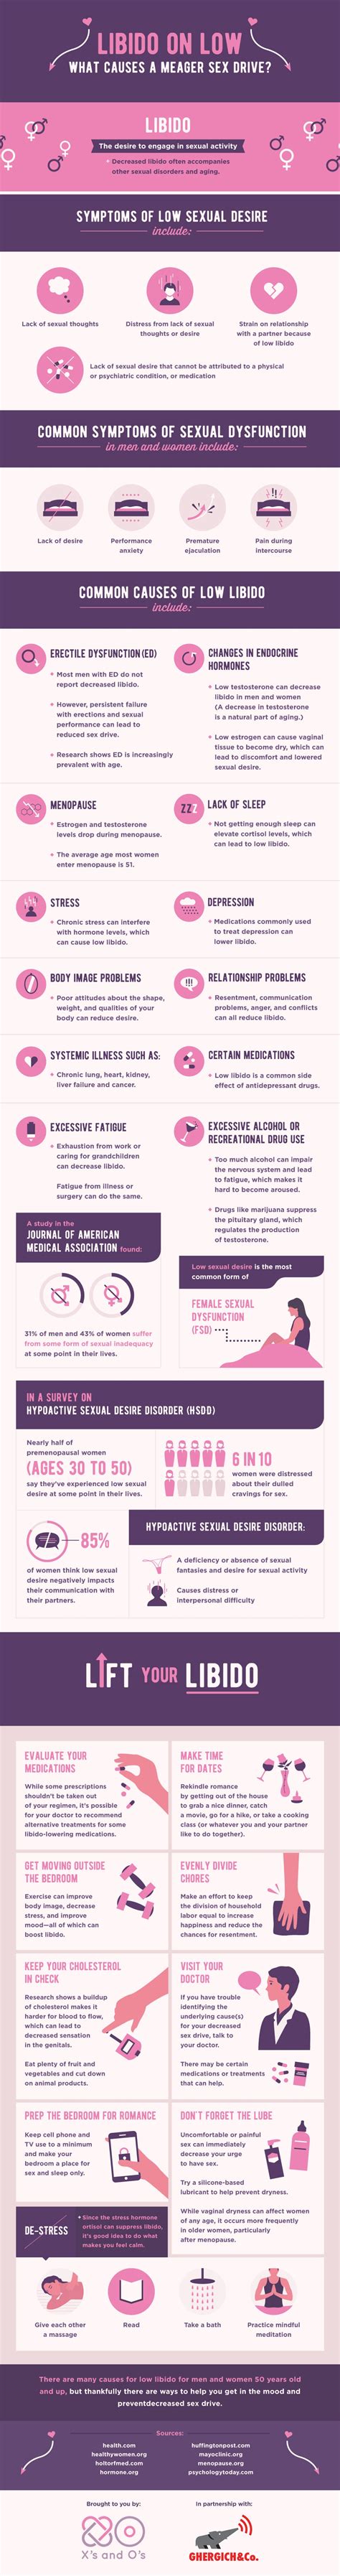 The Reason Behind Low Libido Infographic